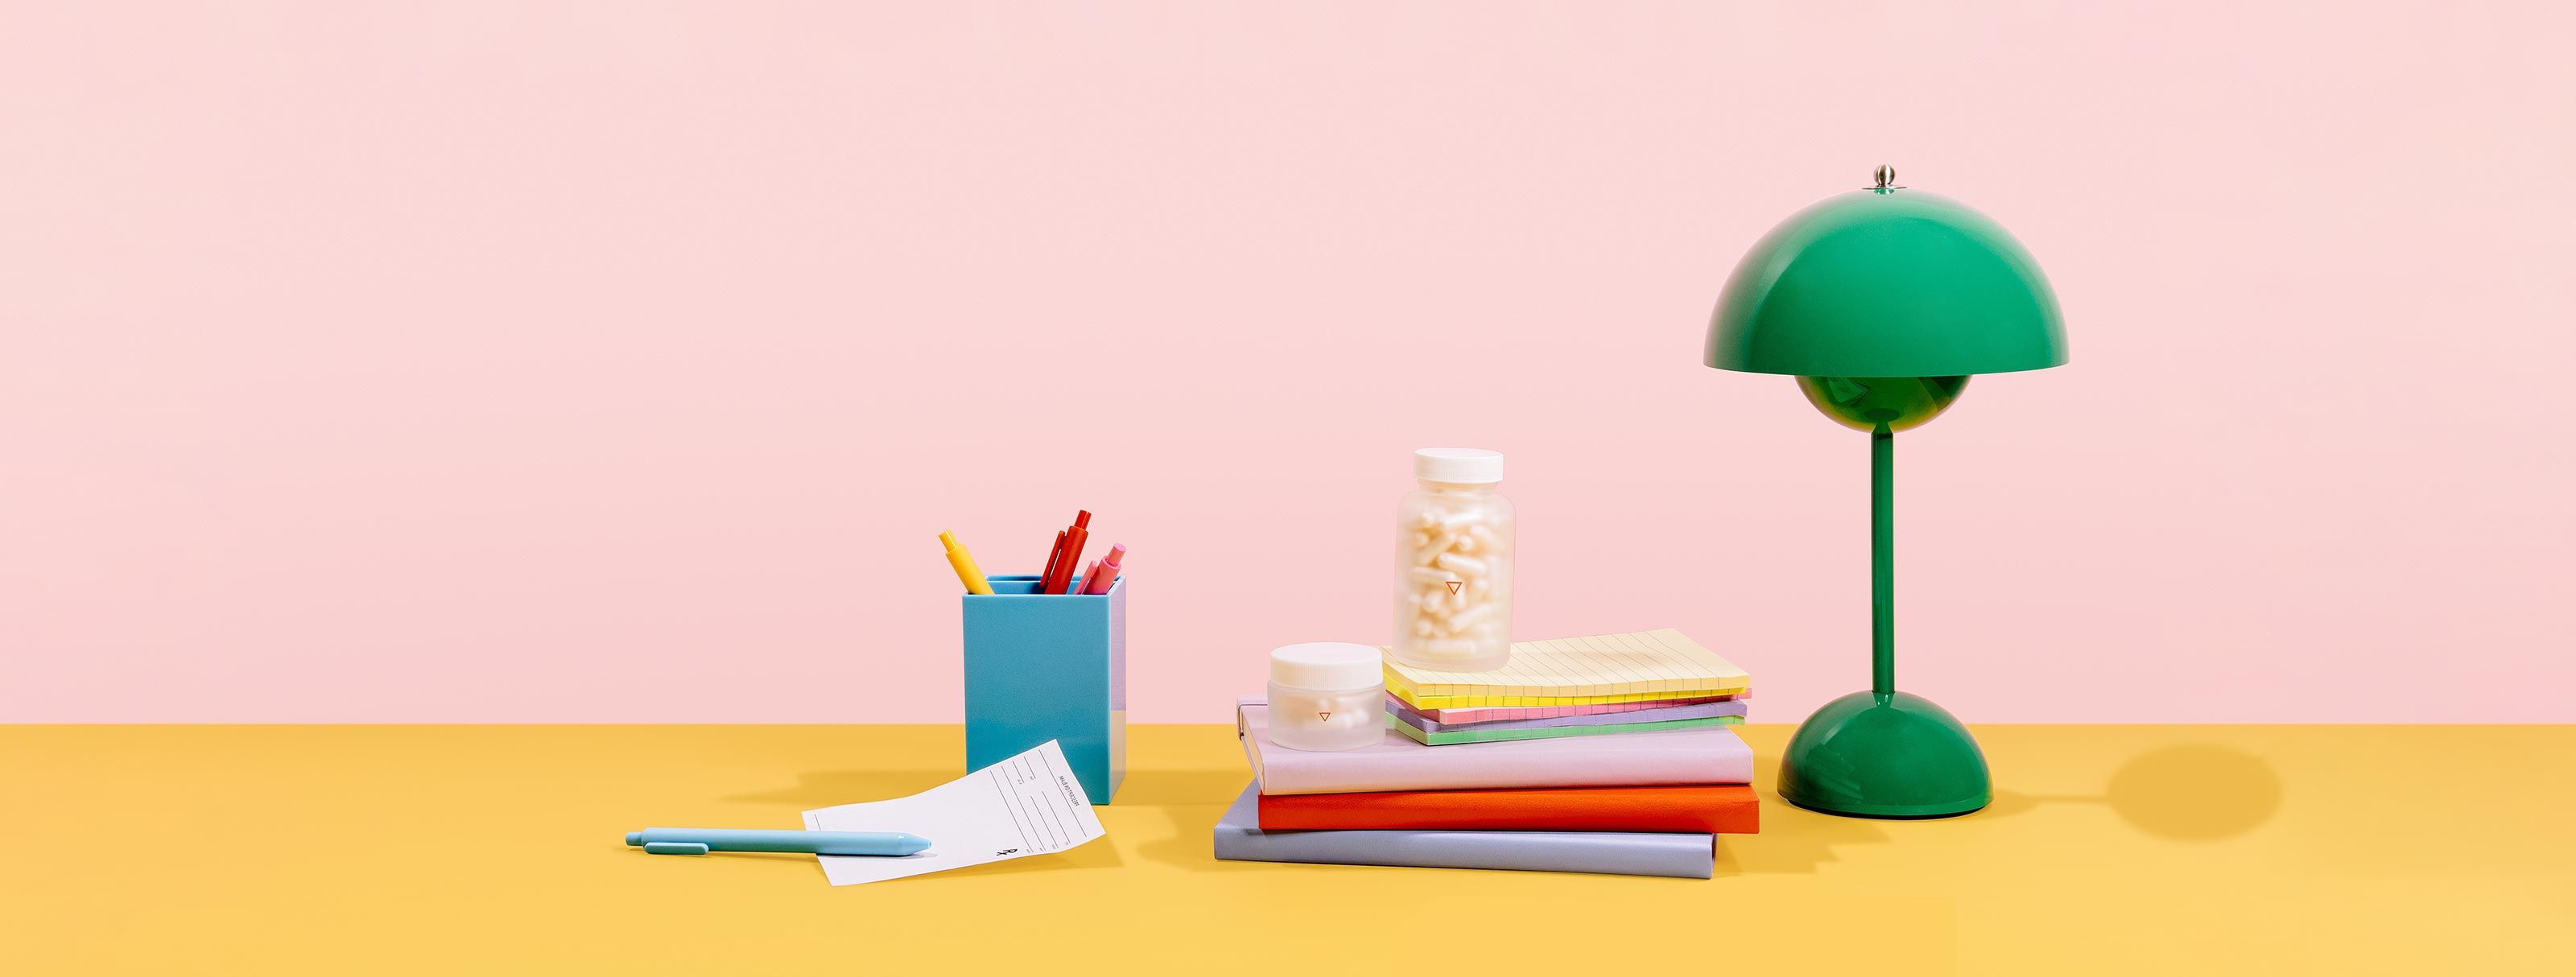 Medications in discreet packaging sit on yellow desk surface against a pink wall